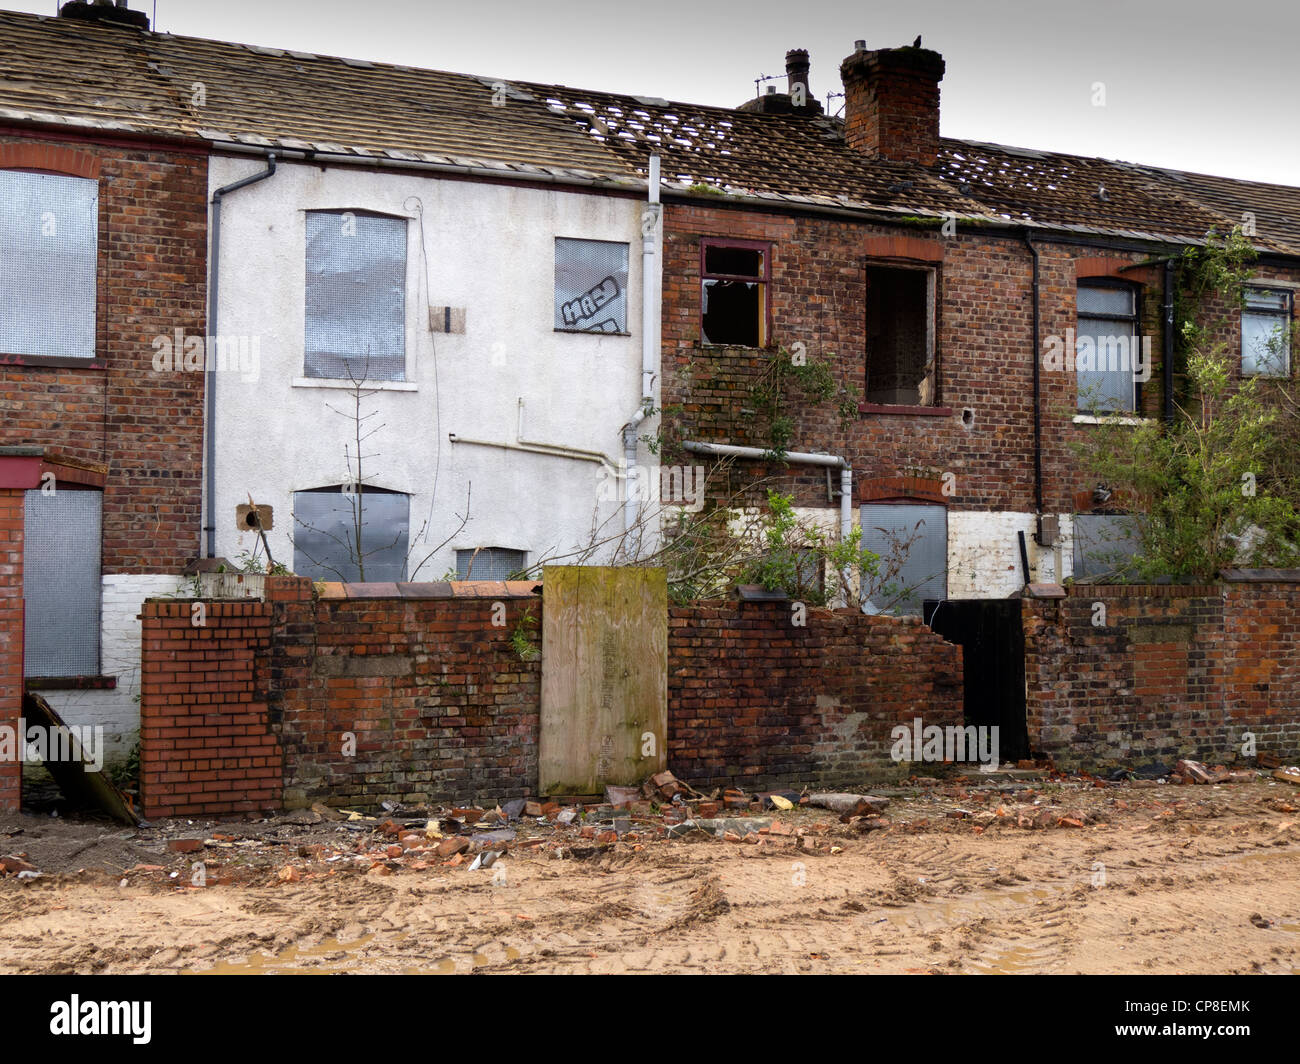 England, Salford, Lower Broughton, early 19th century housing ready for demolition Stock Photo